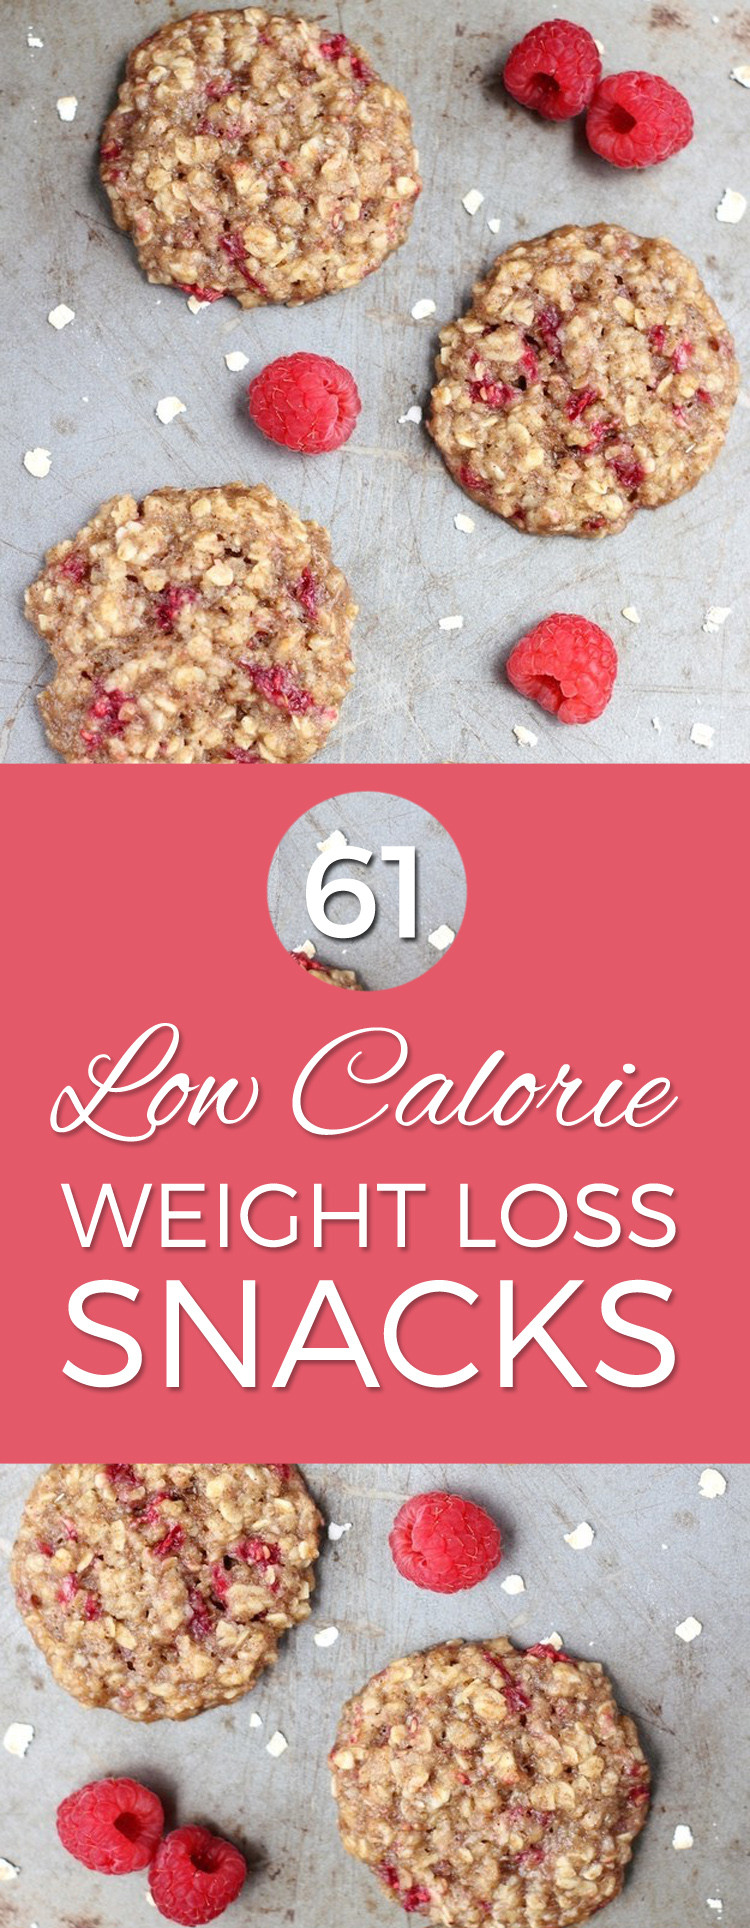 Low Calorie Crackers
 61 Super Healthy Super Low Calorie Snacks To Help You Lose